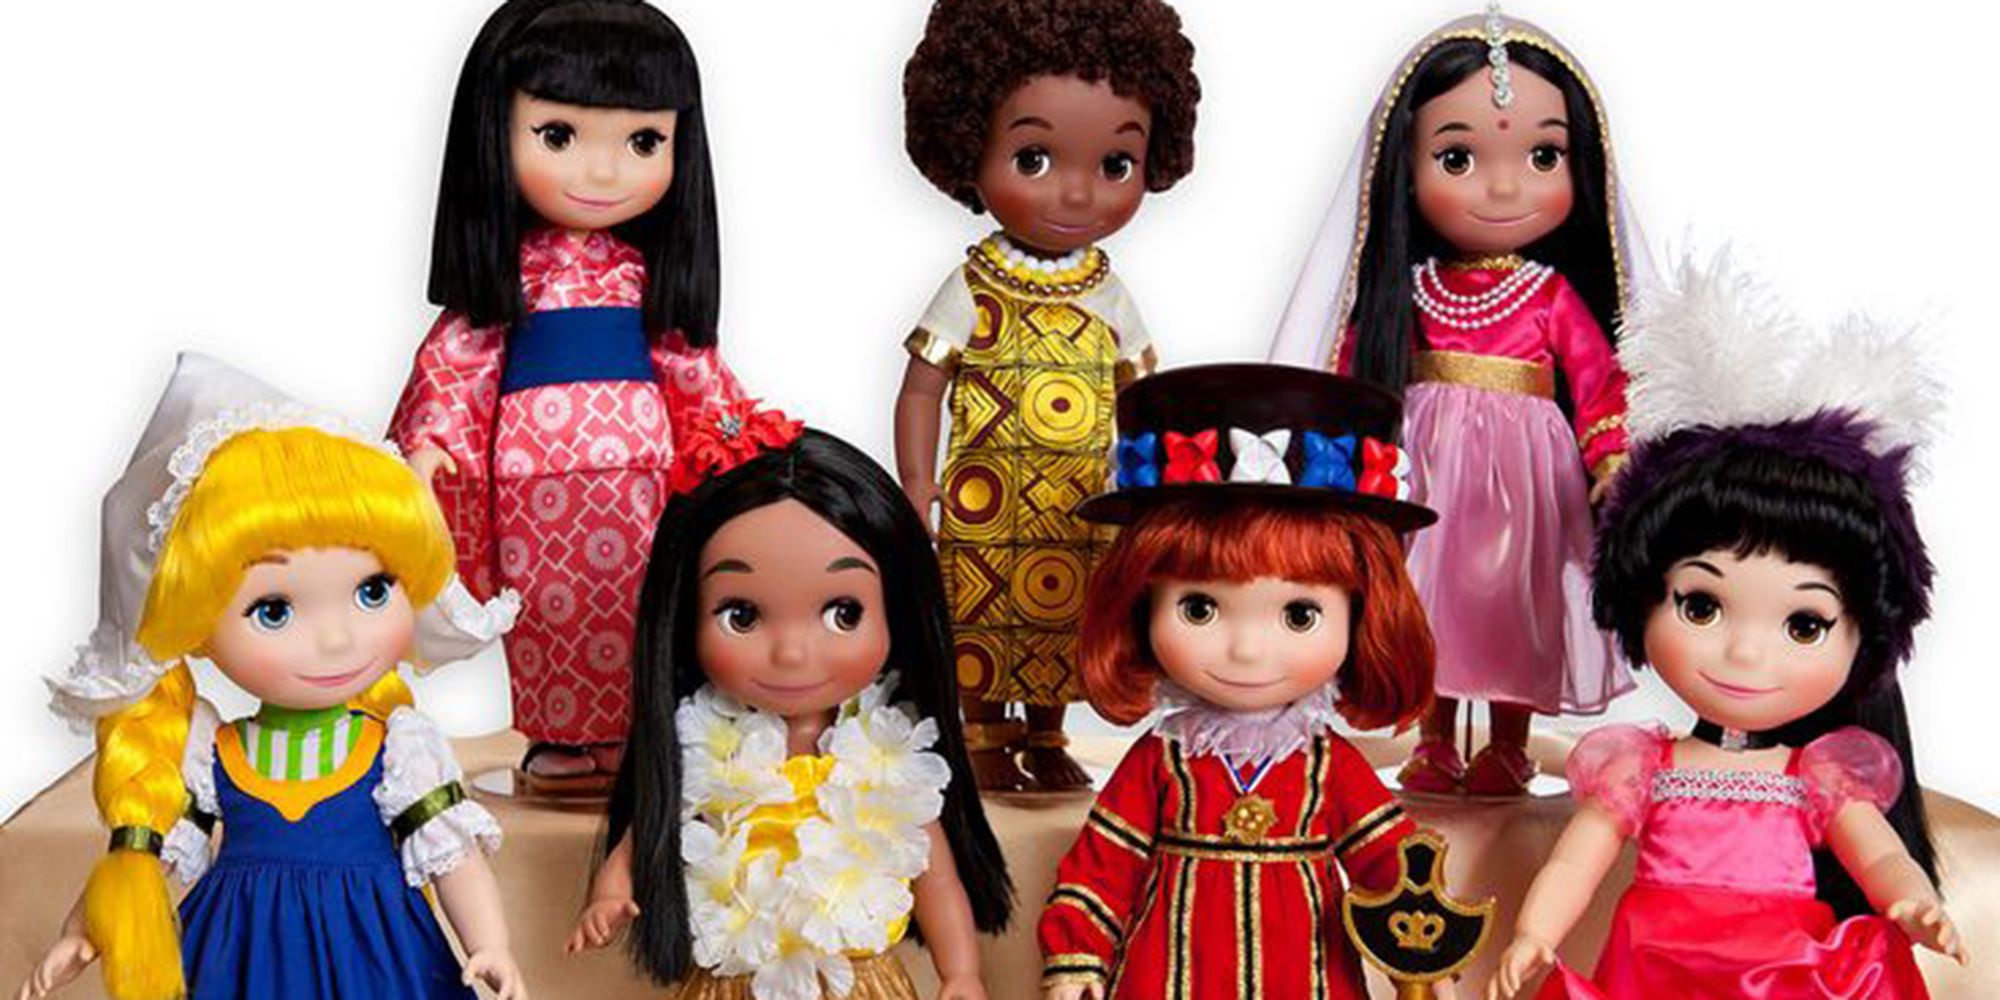 The dolls from It's a Small World